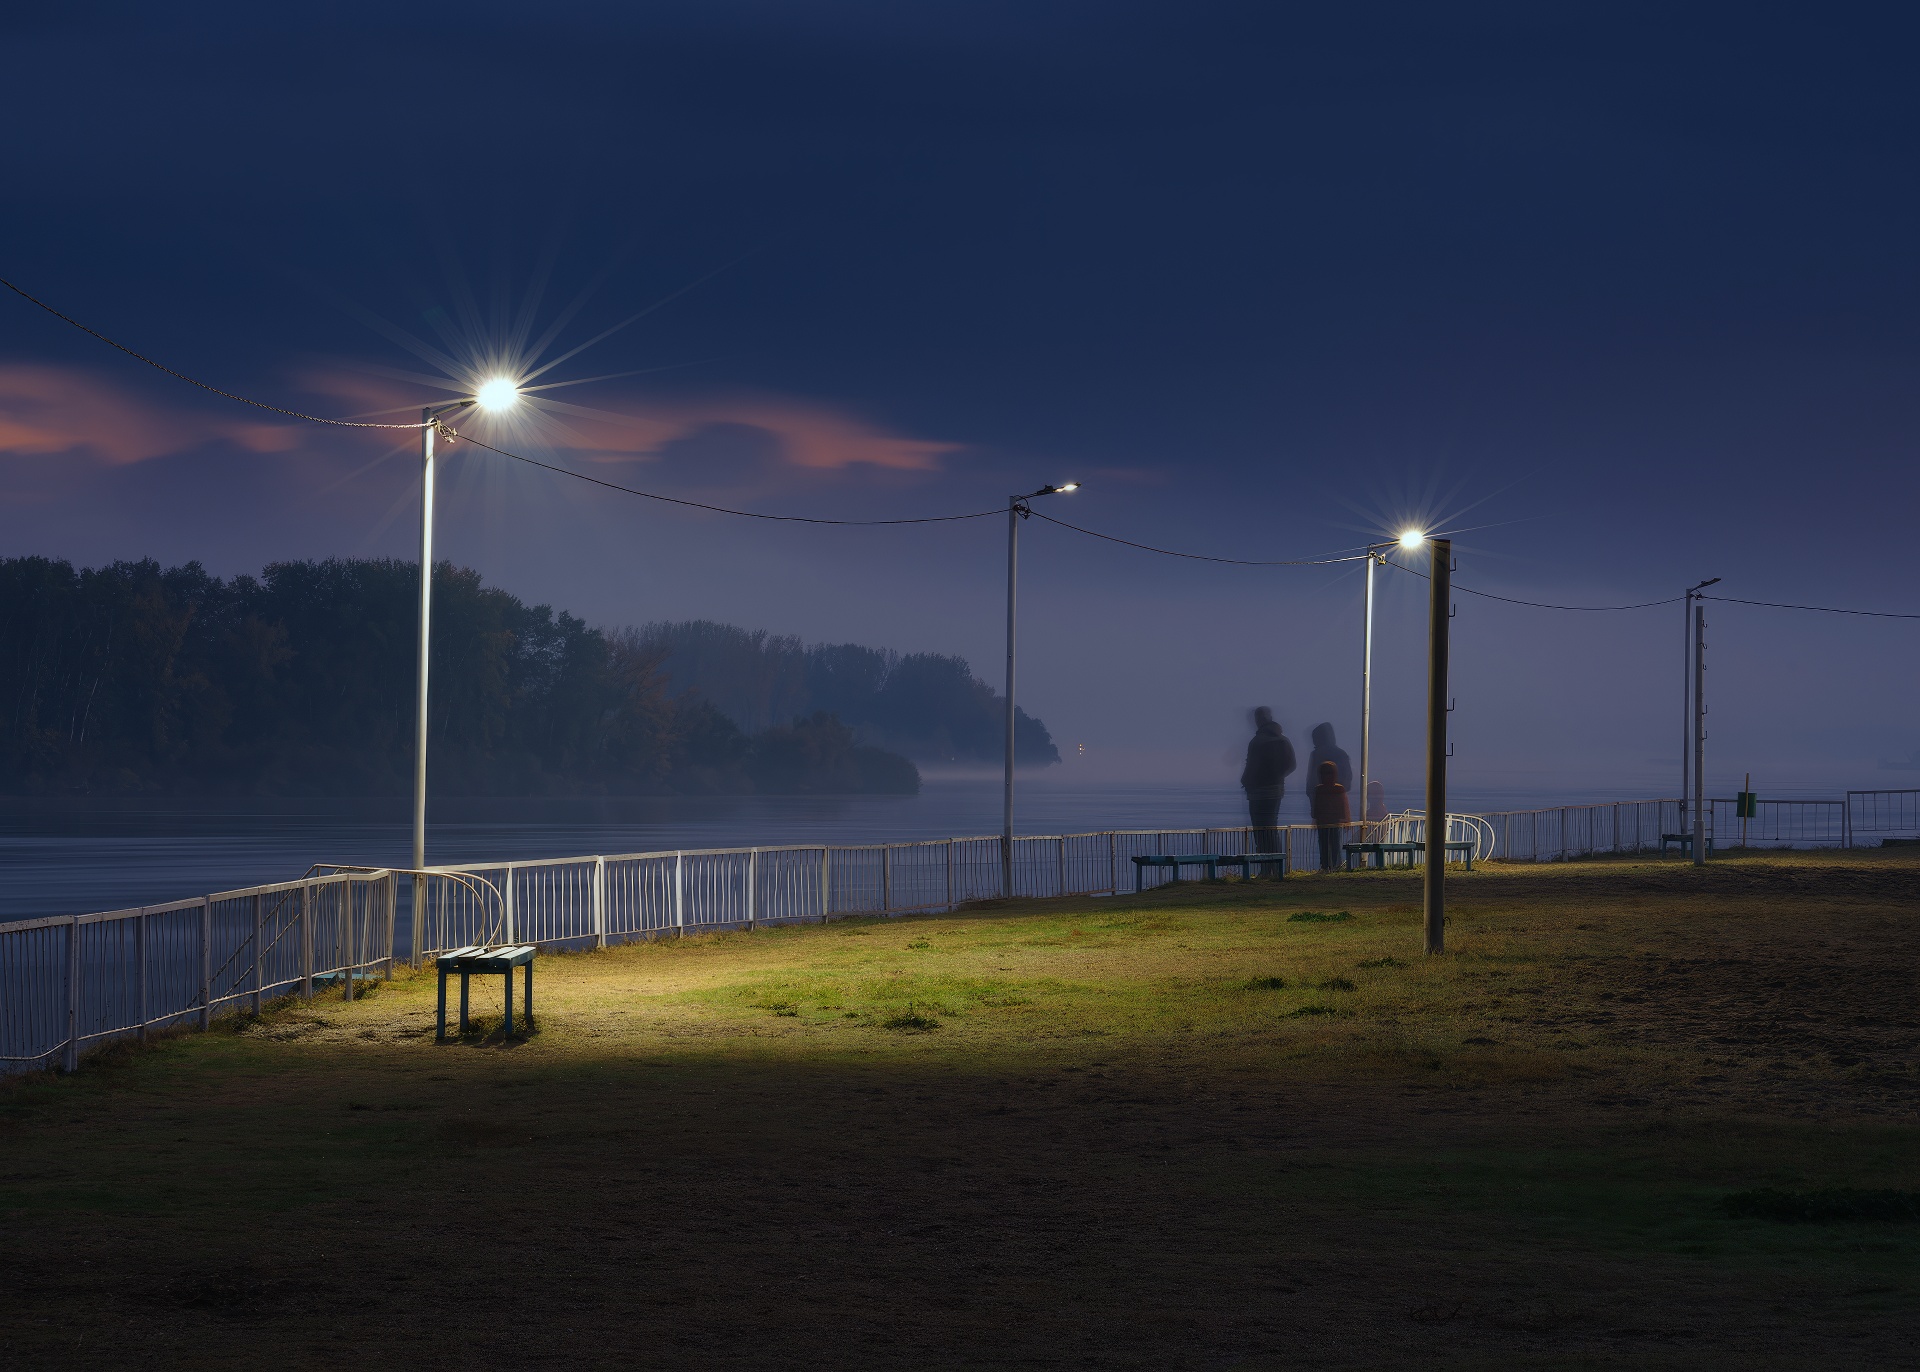 People 1920x1372 children people night outdoors photography street light bench fence grass landscape sea mist long exposure